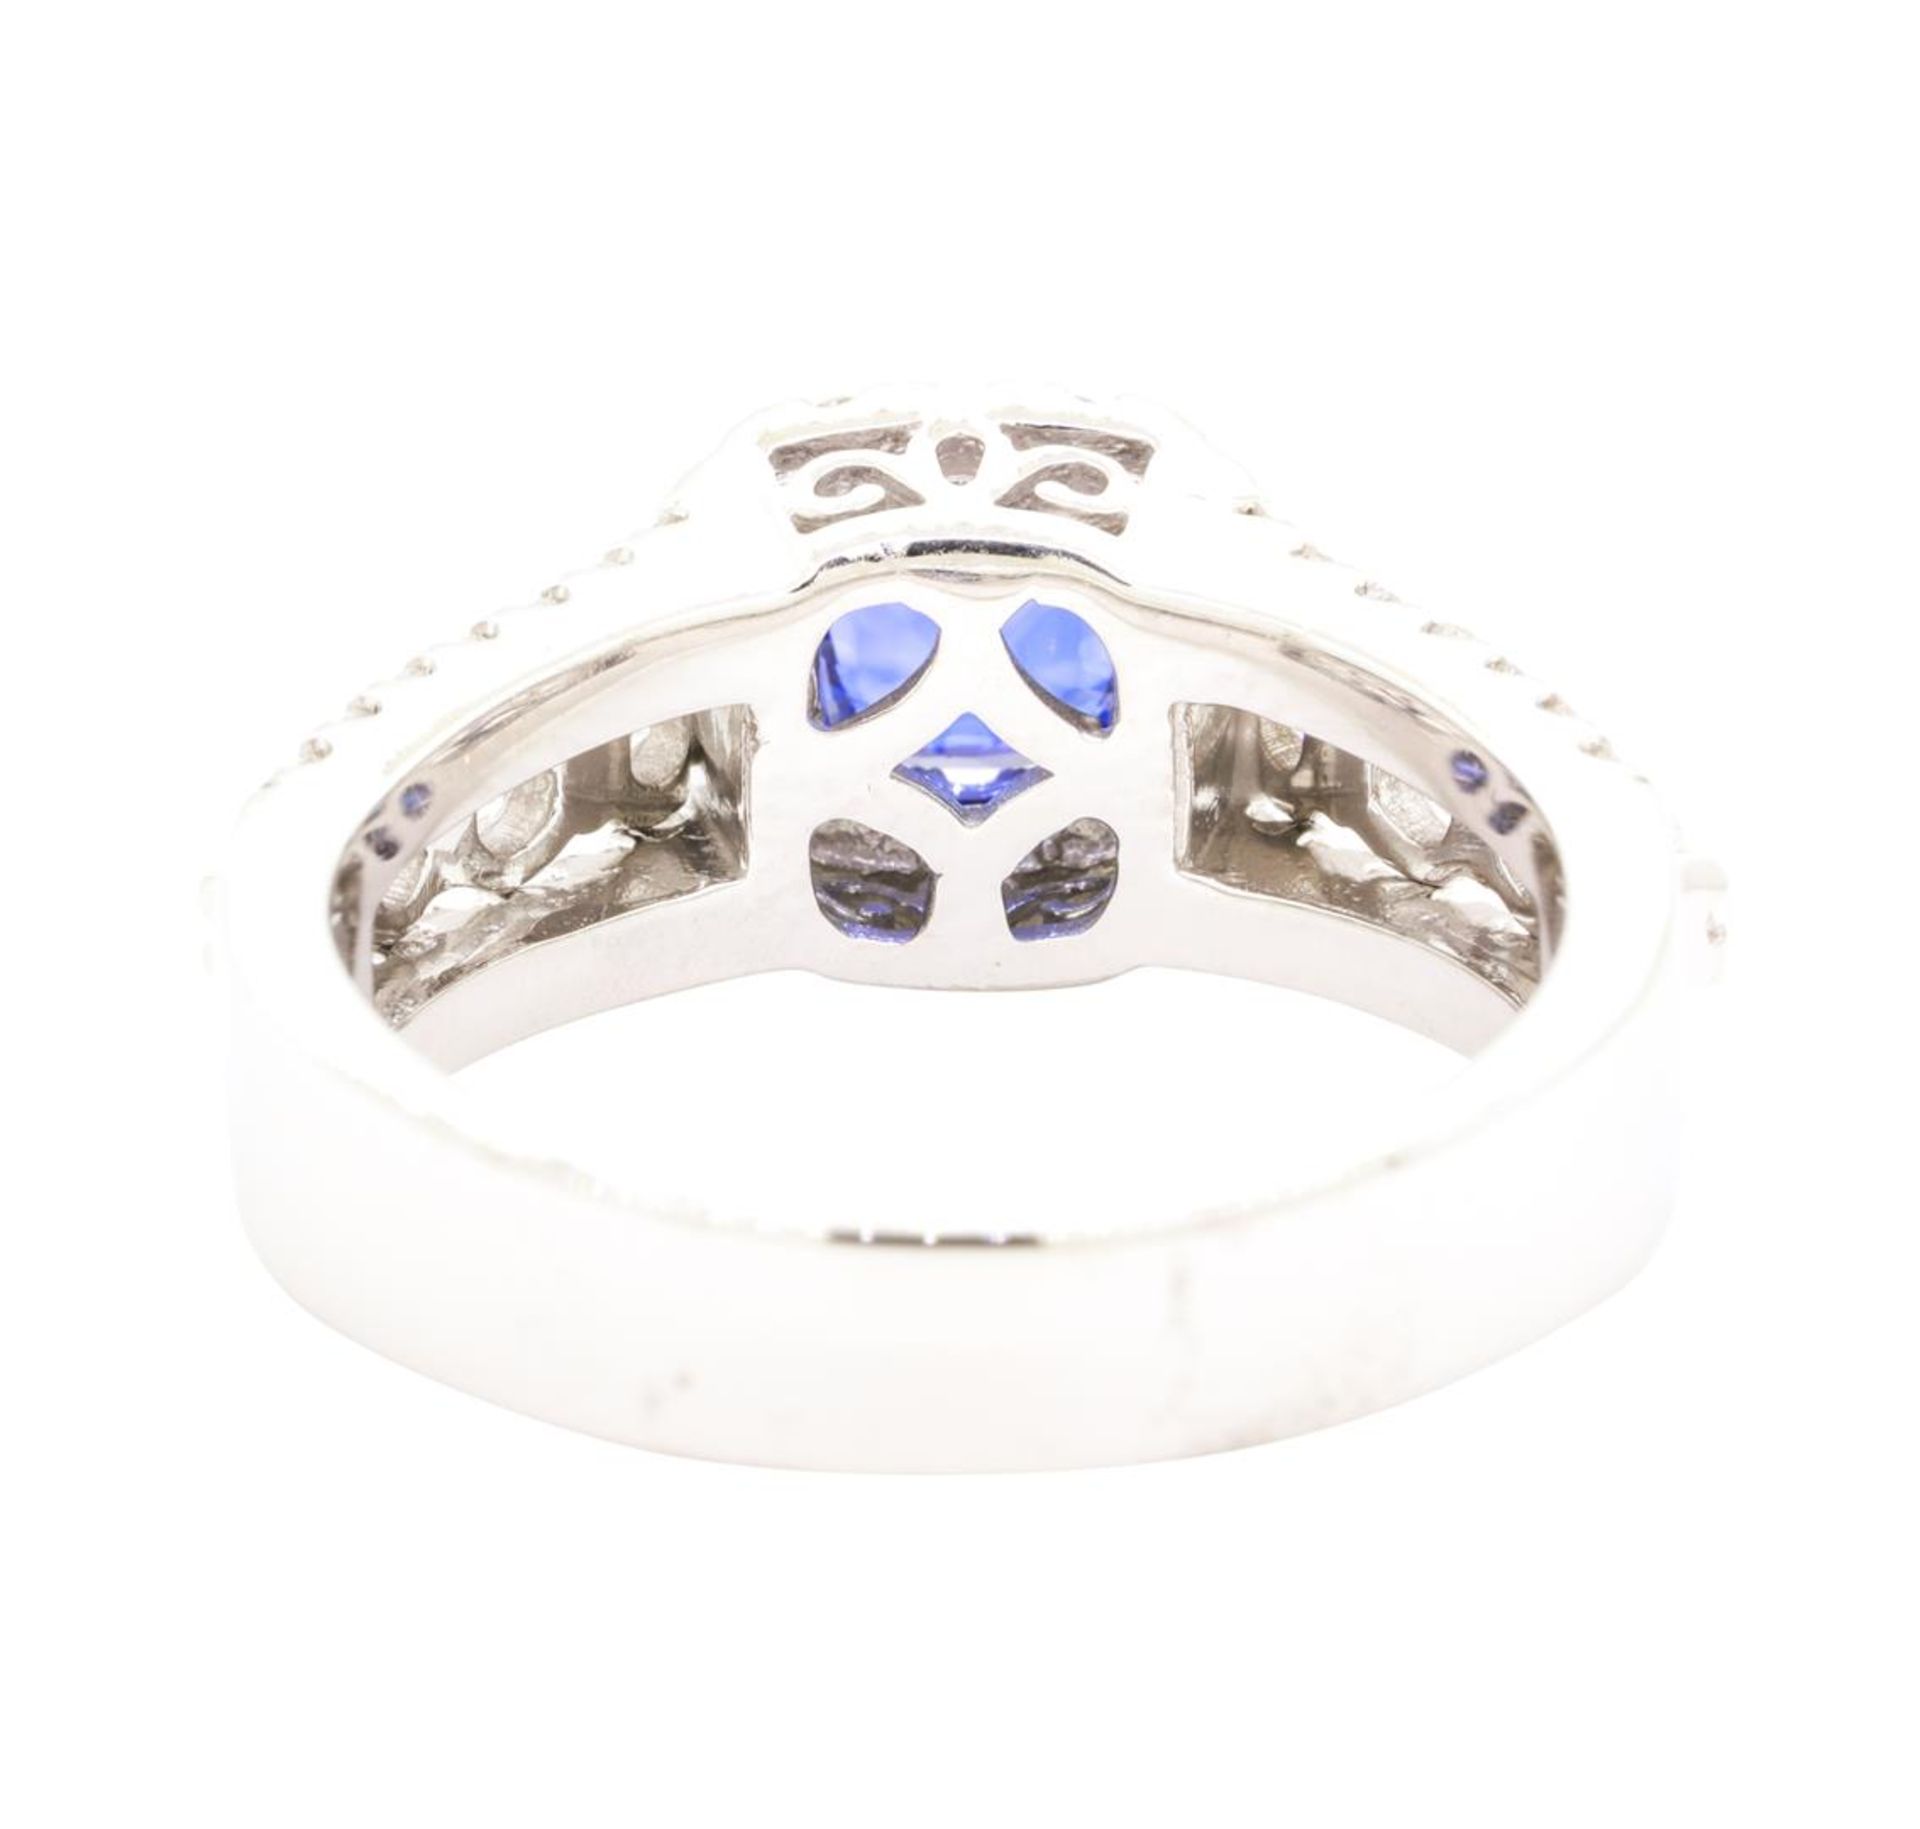 1.86 ctw Sapphire and Diamond Ring - 14KT White Gold - Image 3 of 5